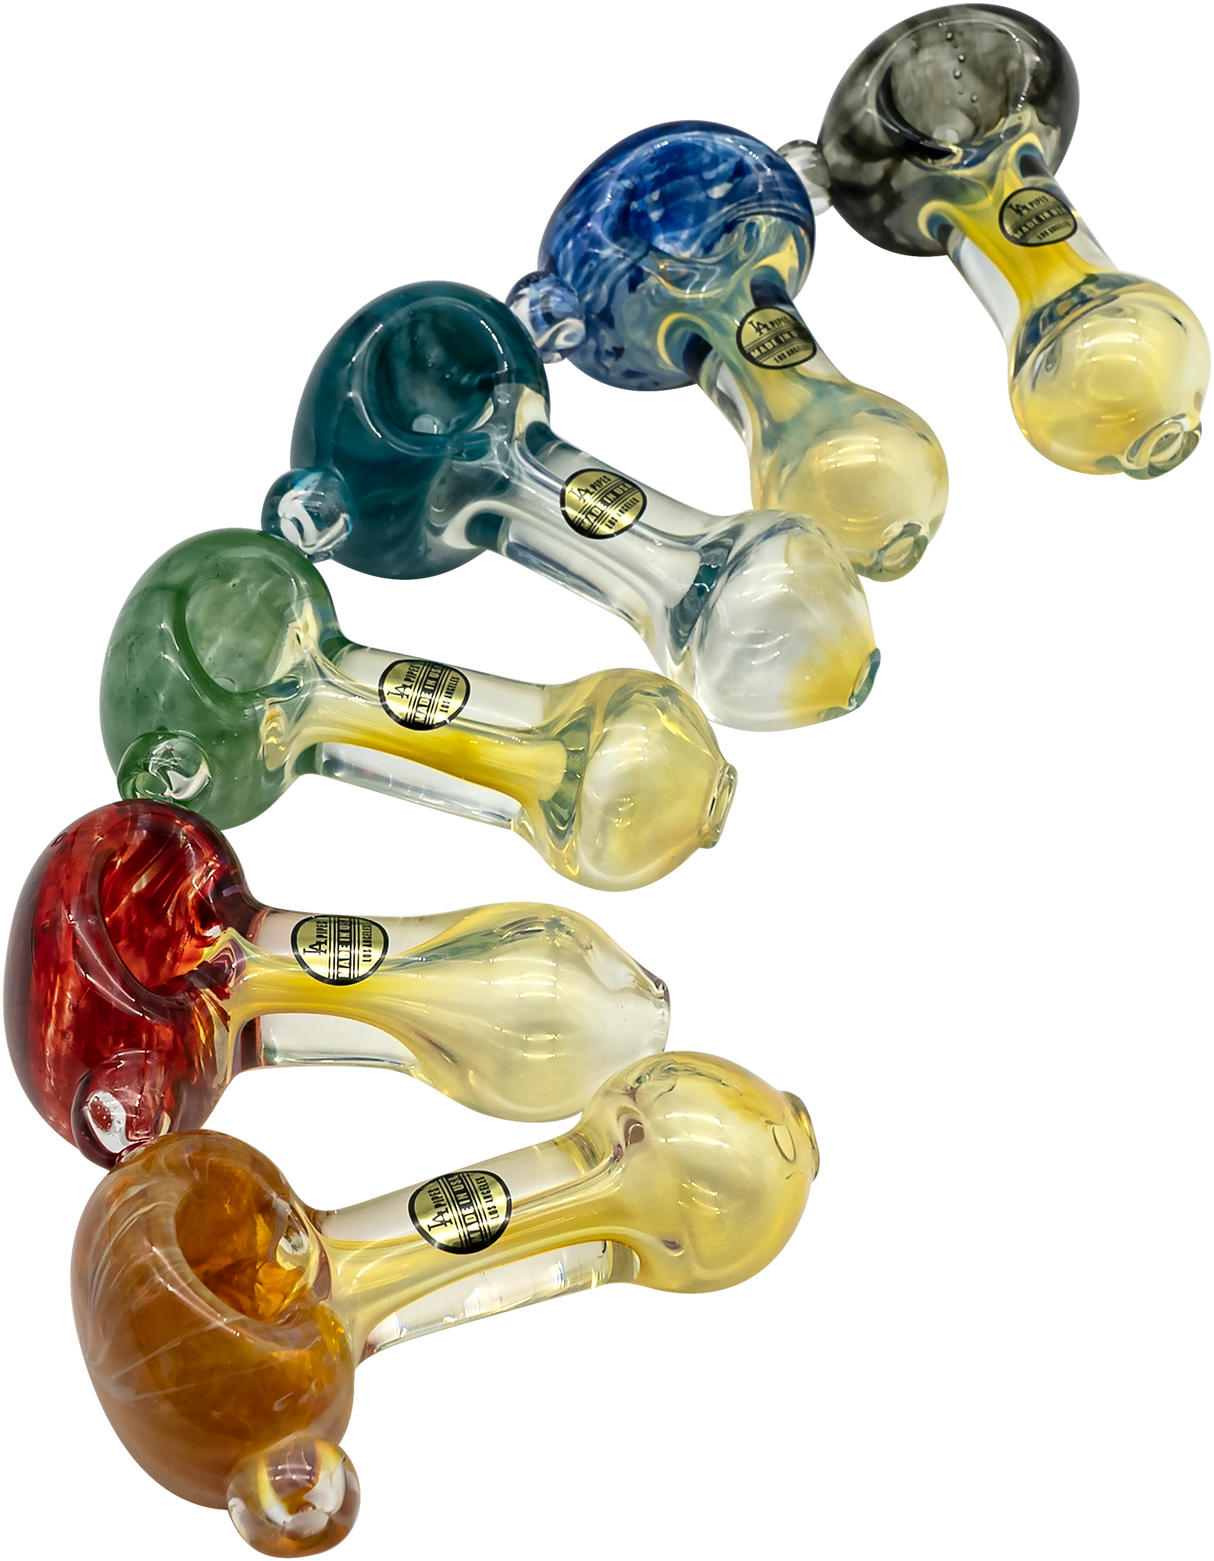 LA Pipes "Thick Neck" Spoon Pipes in various fumed colors, heavy wall borosilicate glass, side view